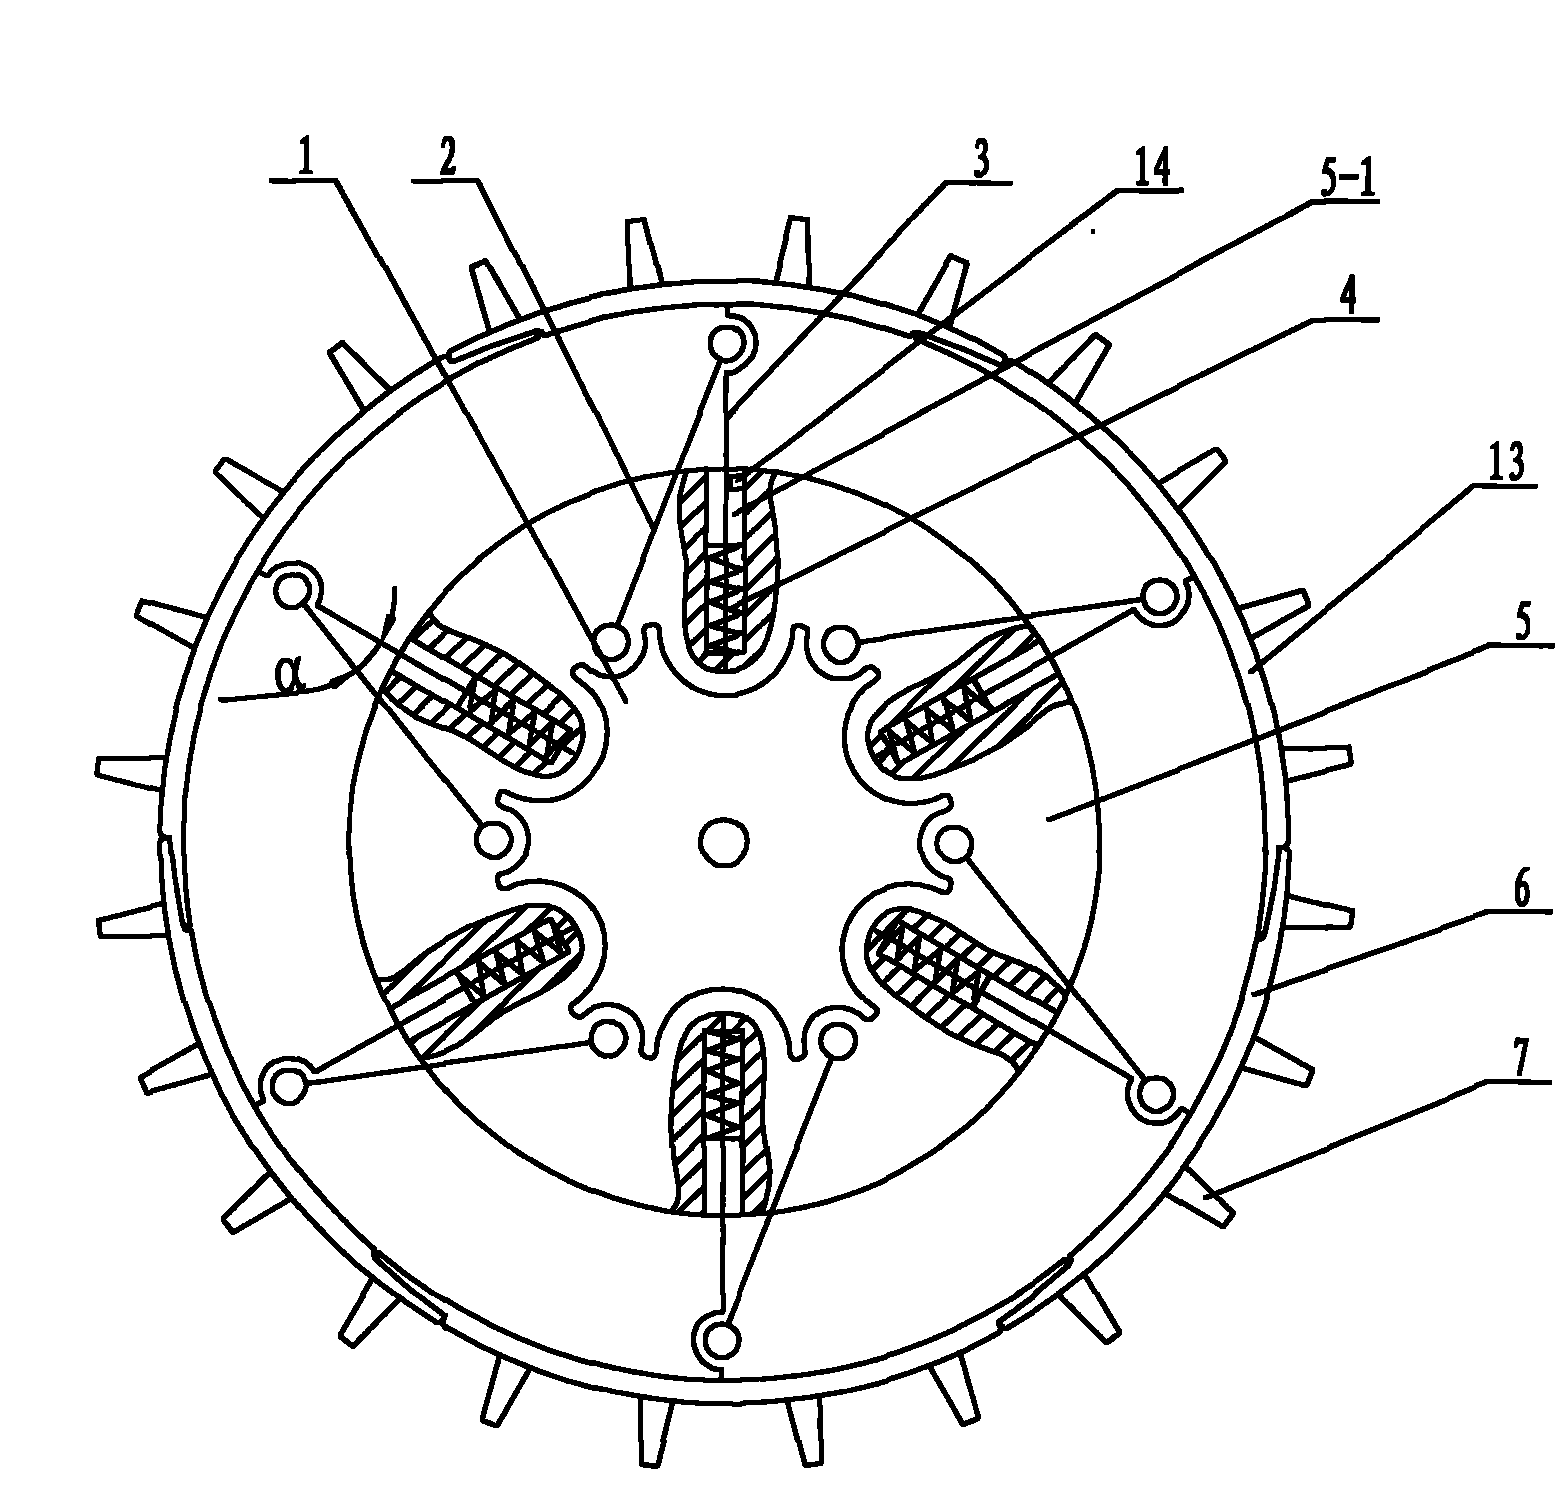 Probe vehicle wheel with variable diameter elastically capable of automatic extension